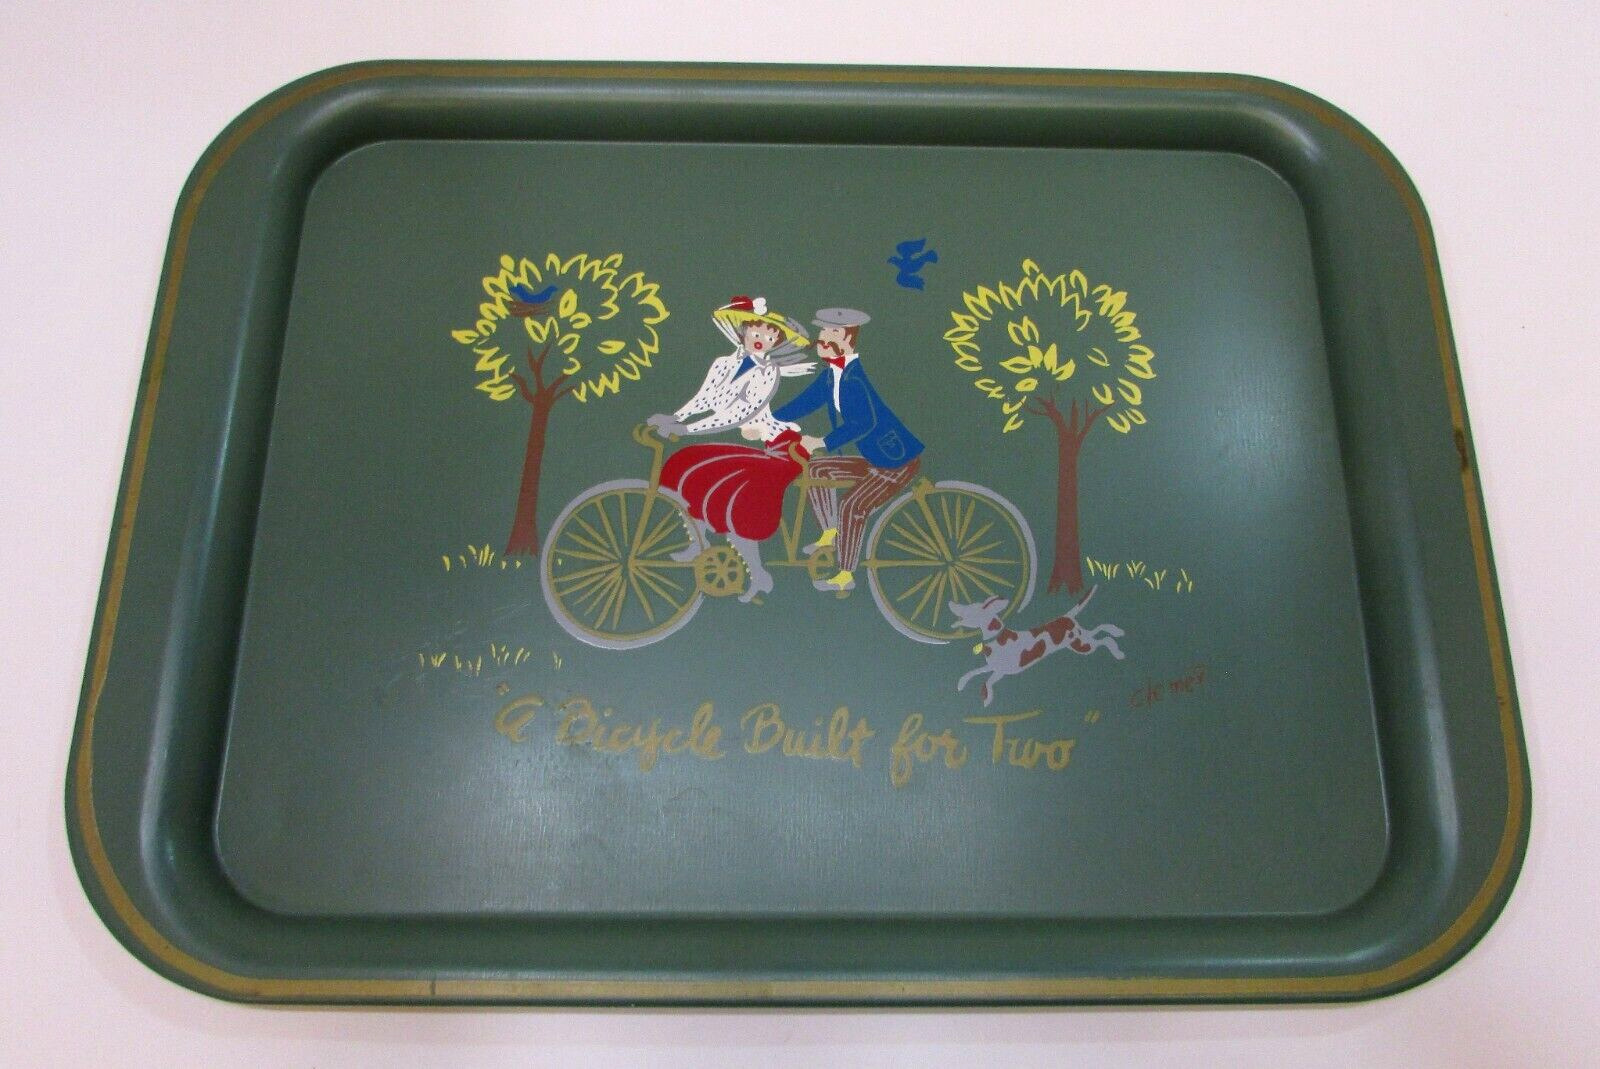 Vintage 1950s USA A Bicycle Built For Two Hand Painted 10x15 Nashco Serving Tray